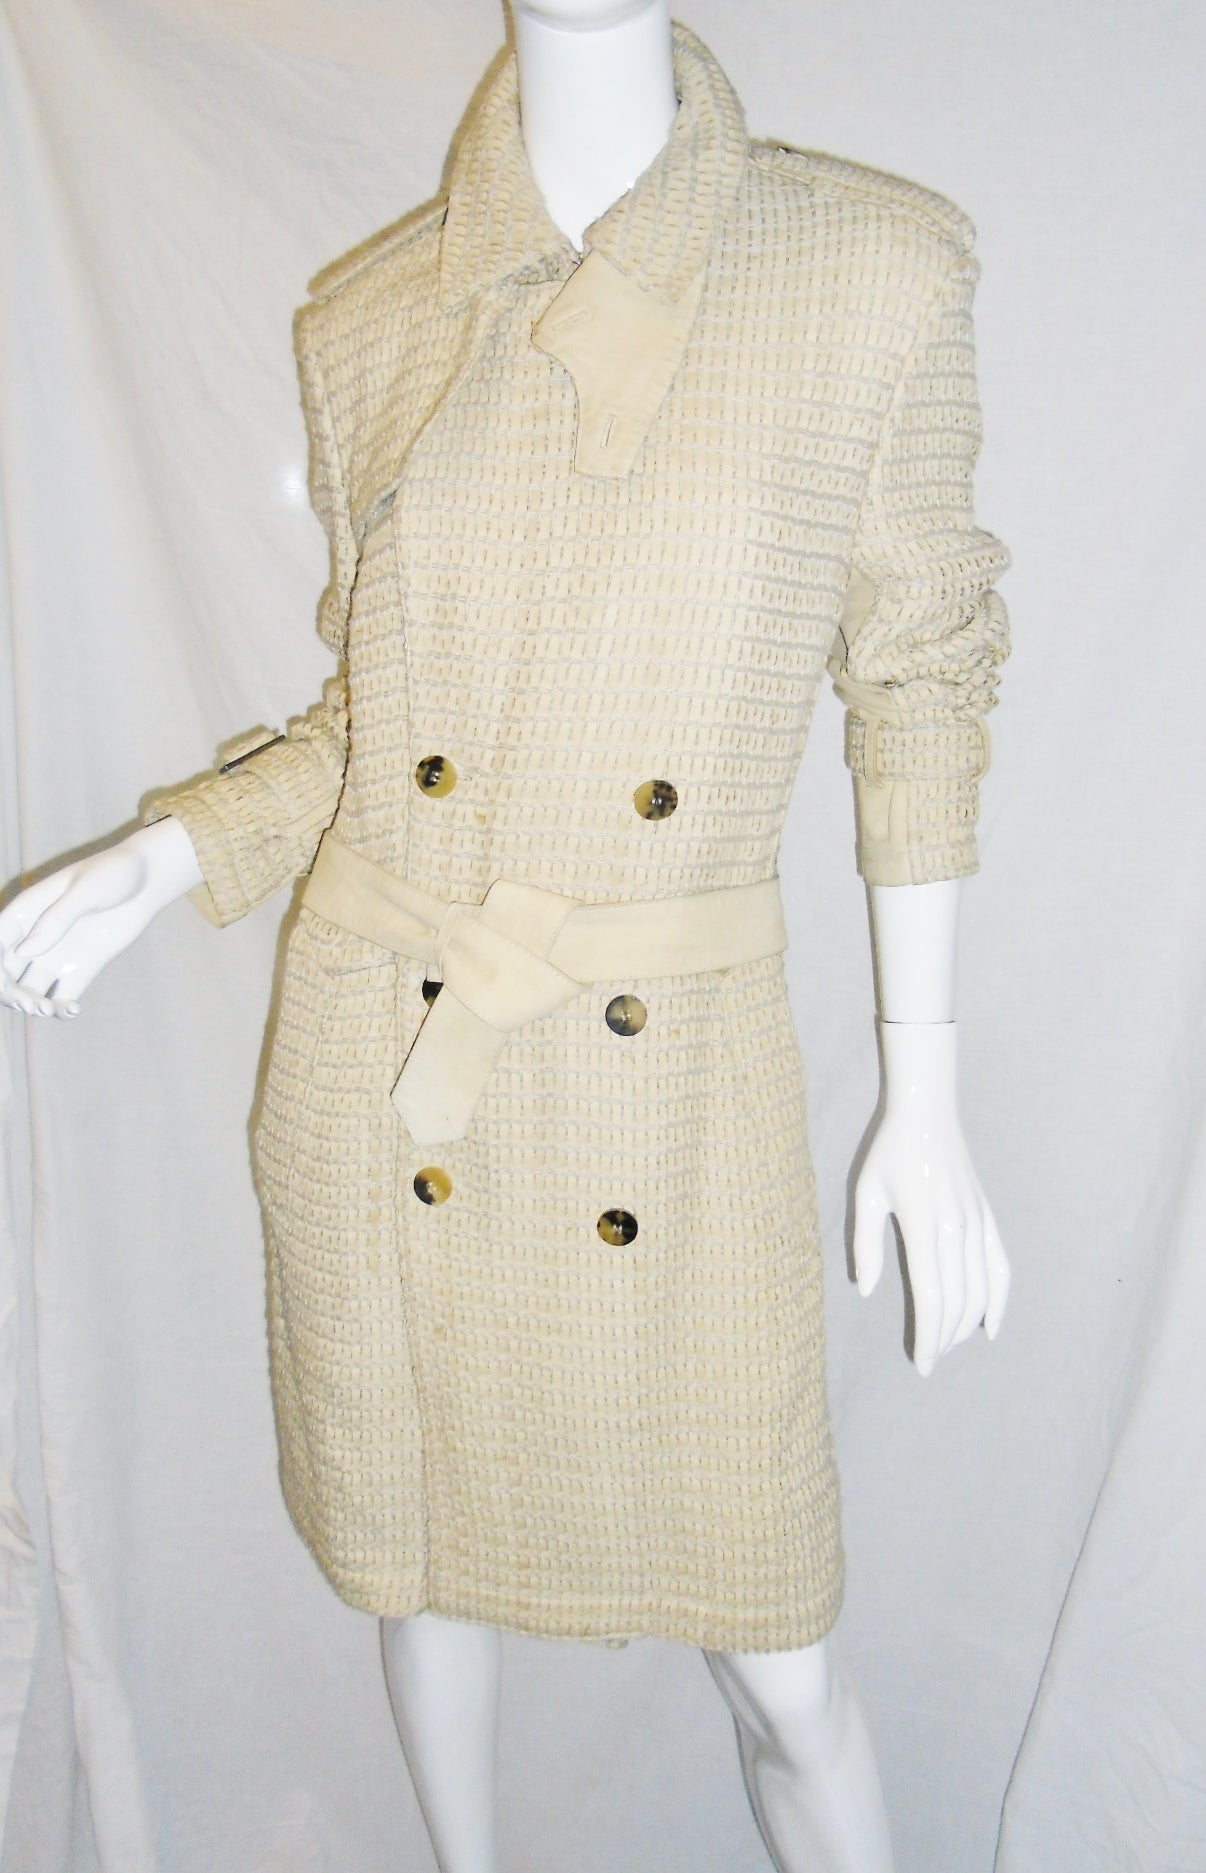 Incredible piece. Only 3 made by order. All hand woven with thin lamb suede trips and cotton thread. Natural horn buttons and sleeve belt buckles. Show stopping trench coat in excellent condition. Worn once on runway and used  few time for photo